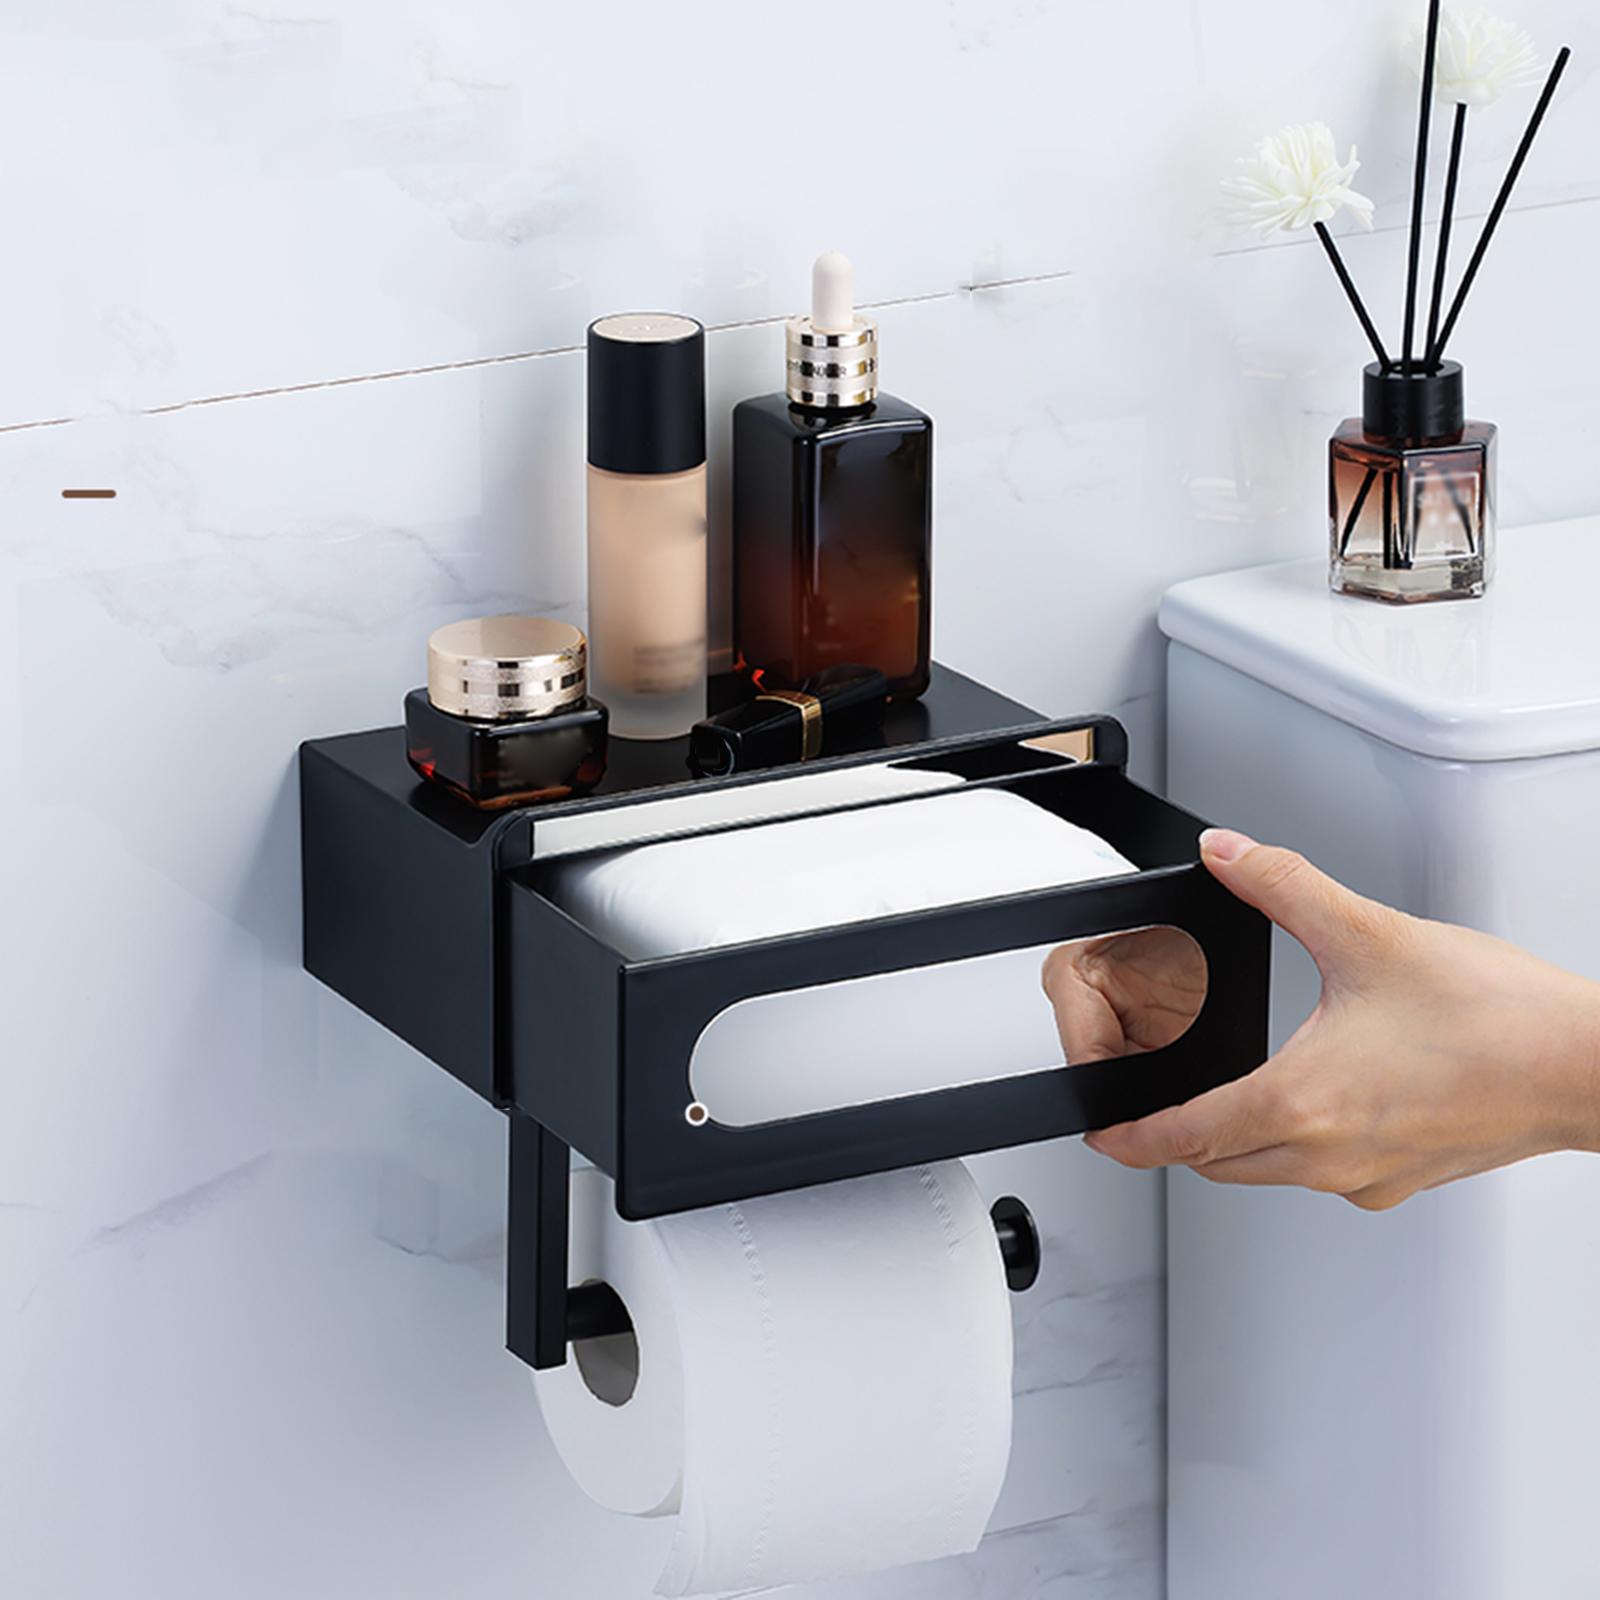 Wall Mounted Toilet Paper Holder Multifunctional Toilet Paper Roll Dispenser Black Style A